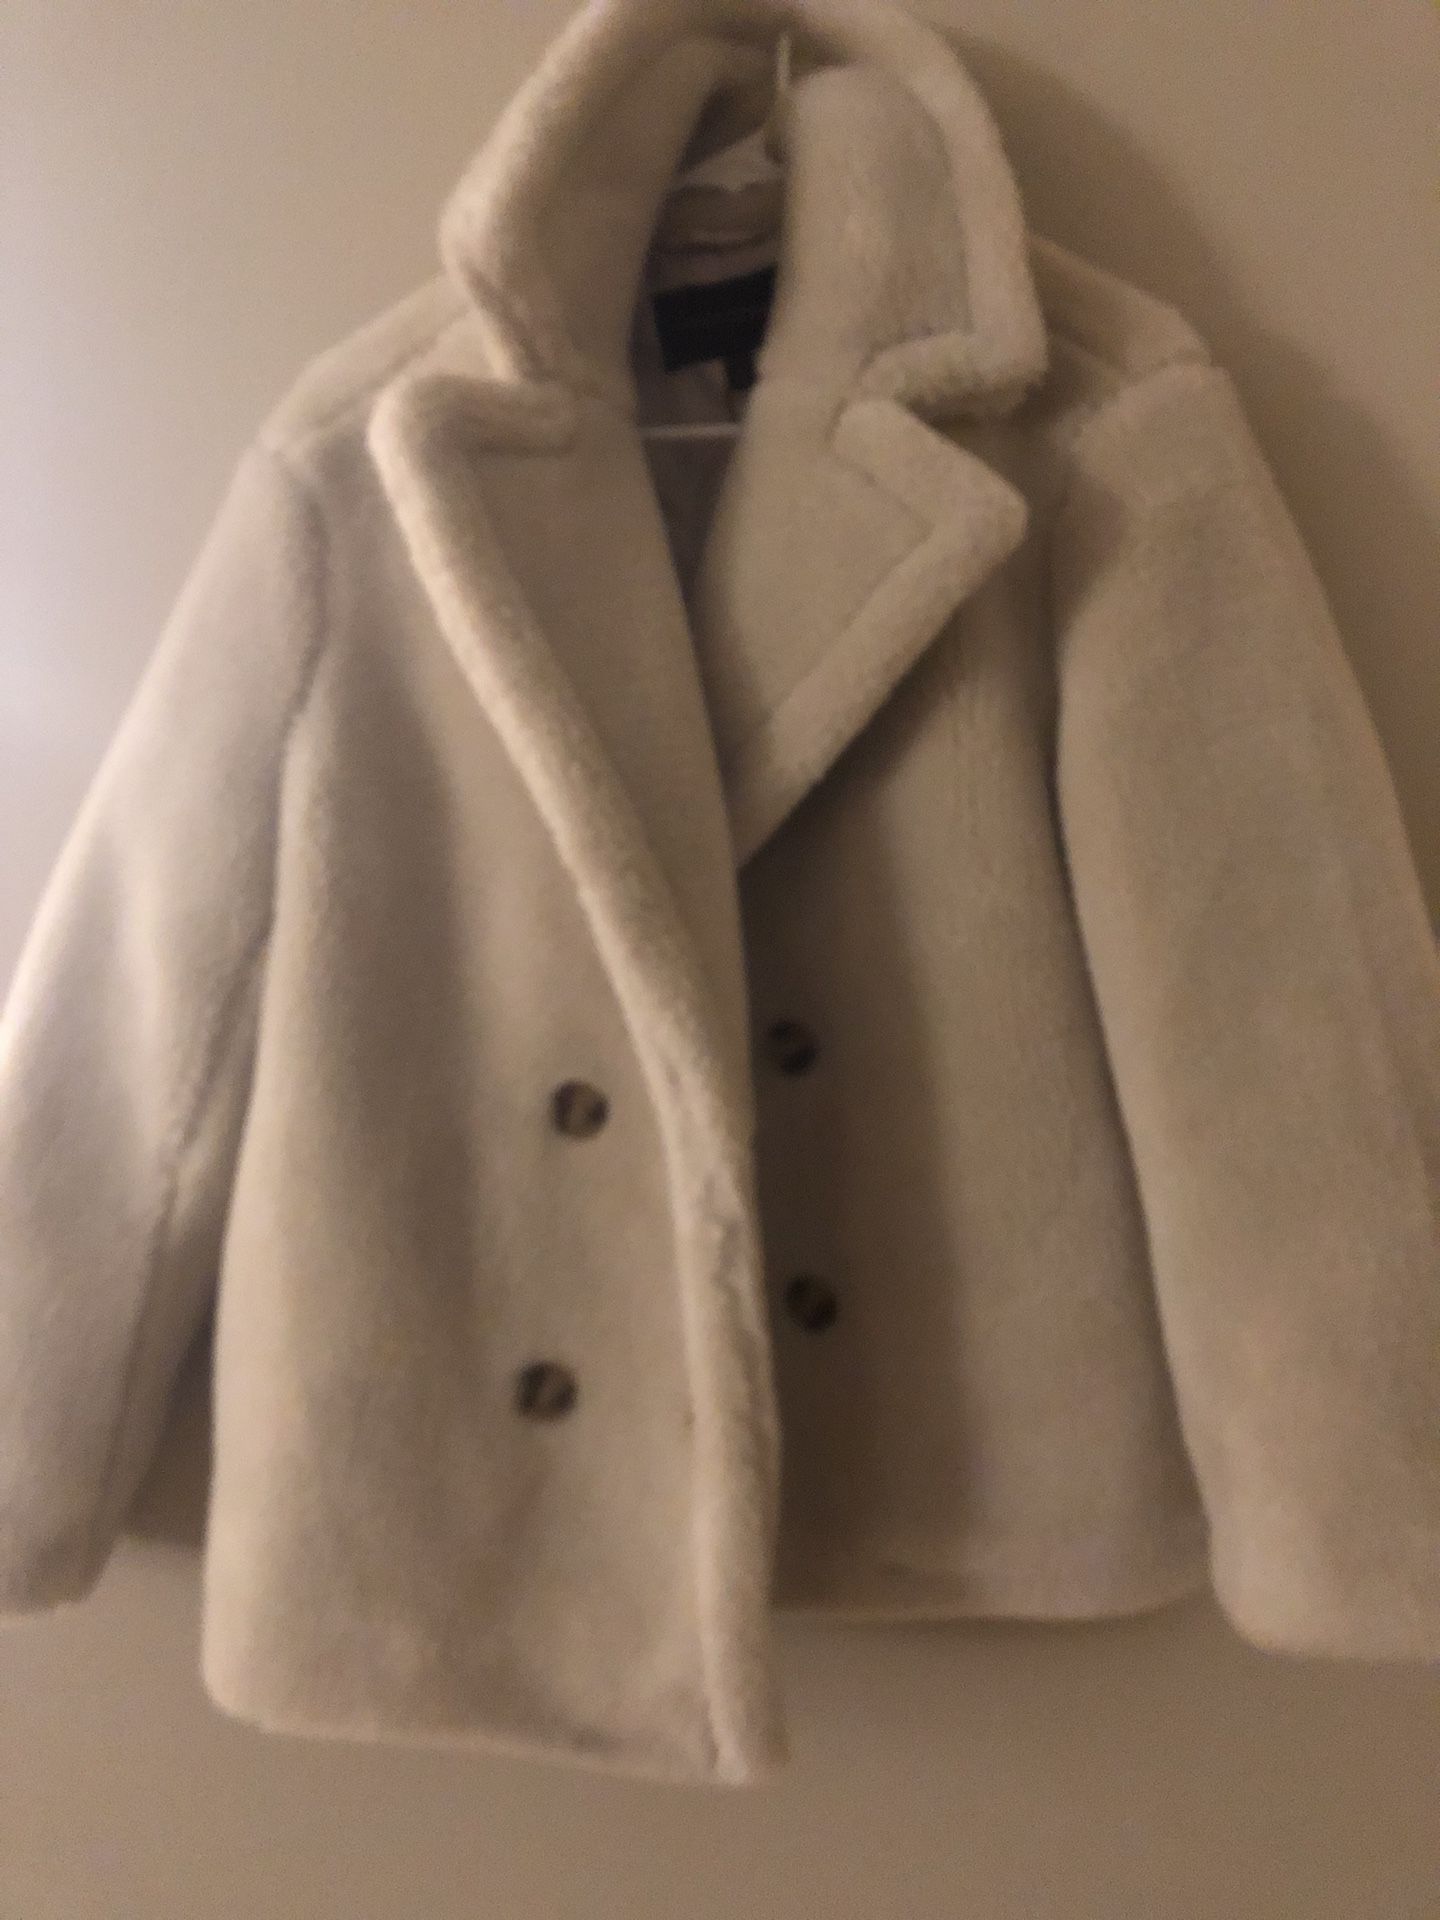 Coats BRAND NAME NEVER WORN W TAGS 